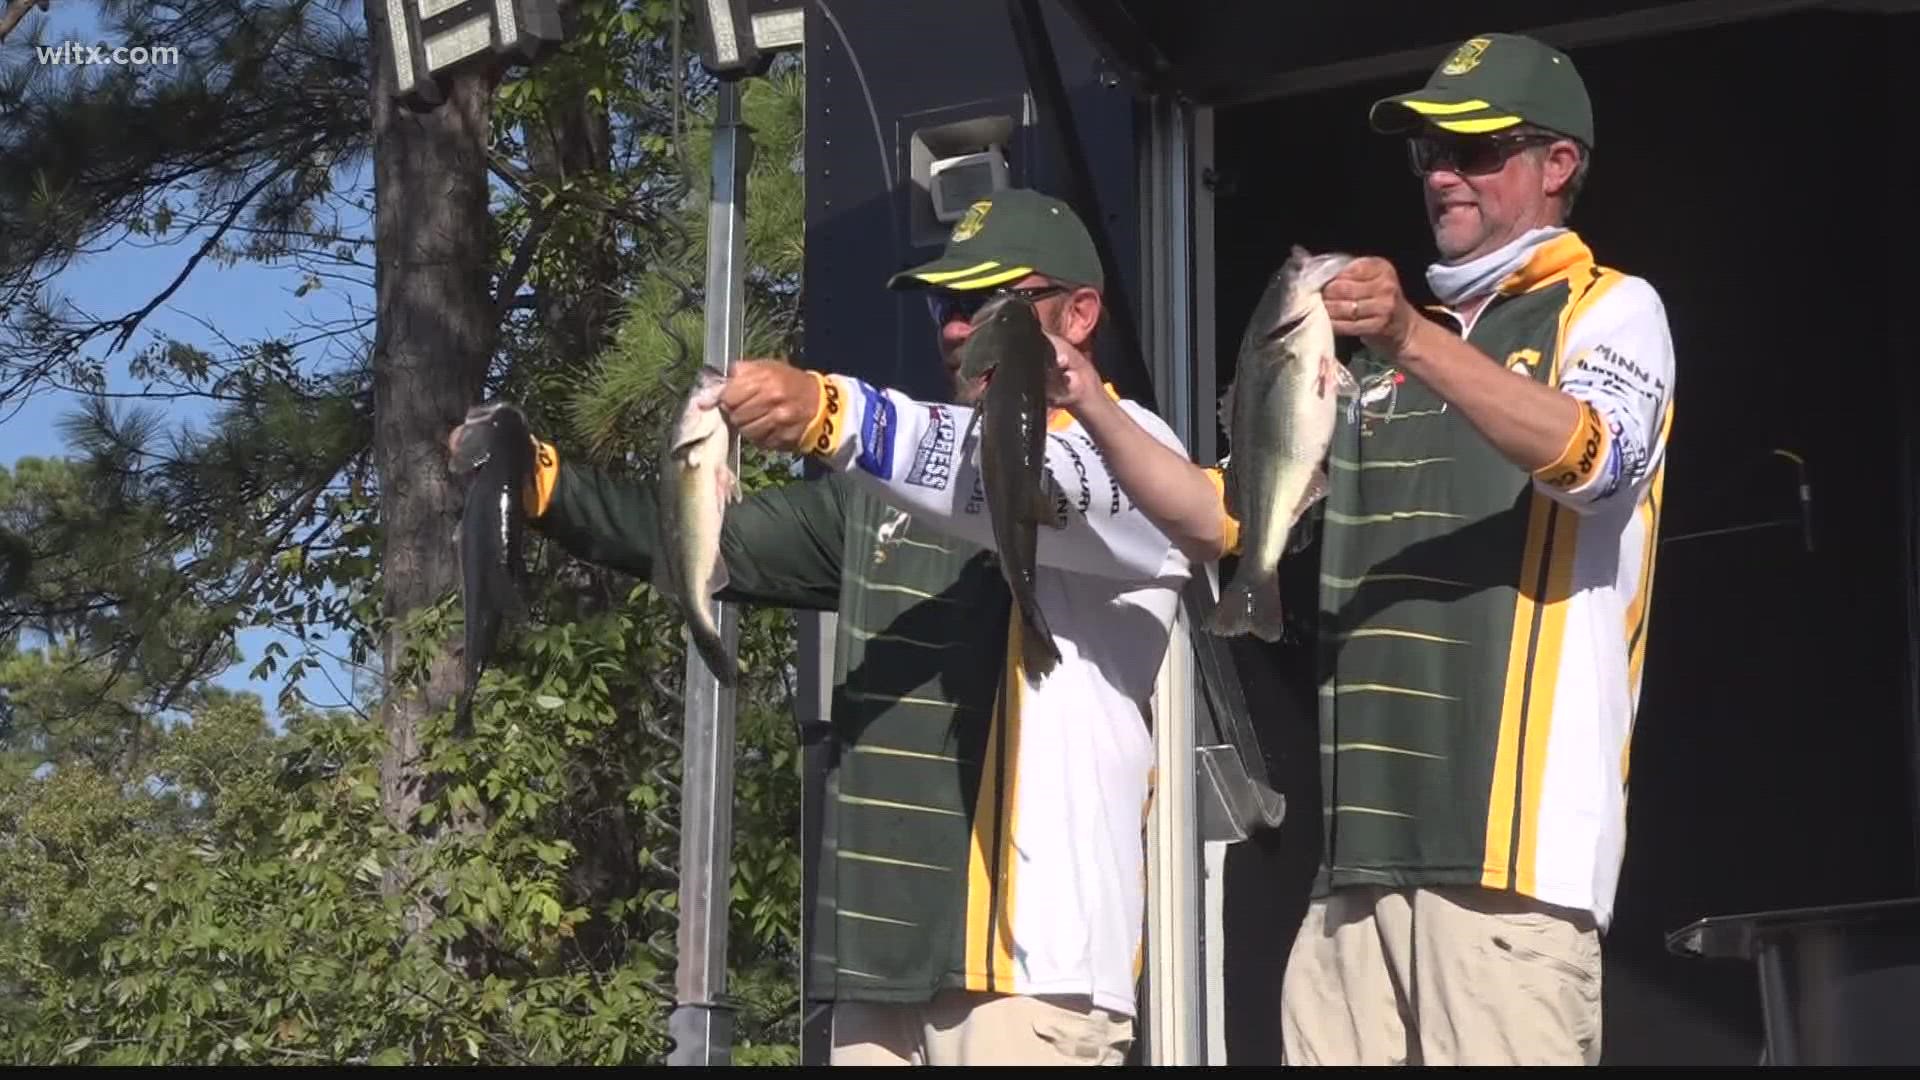 A recent scandal in Ohio has shined a light on how fish are weighed in tournaments.